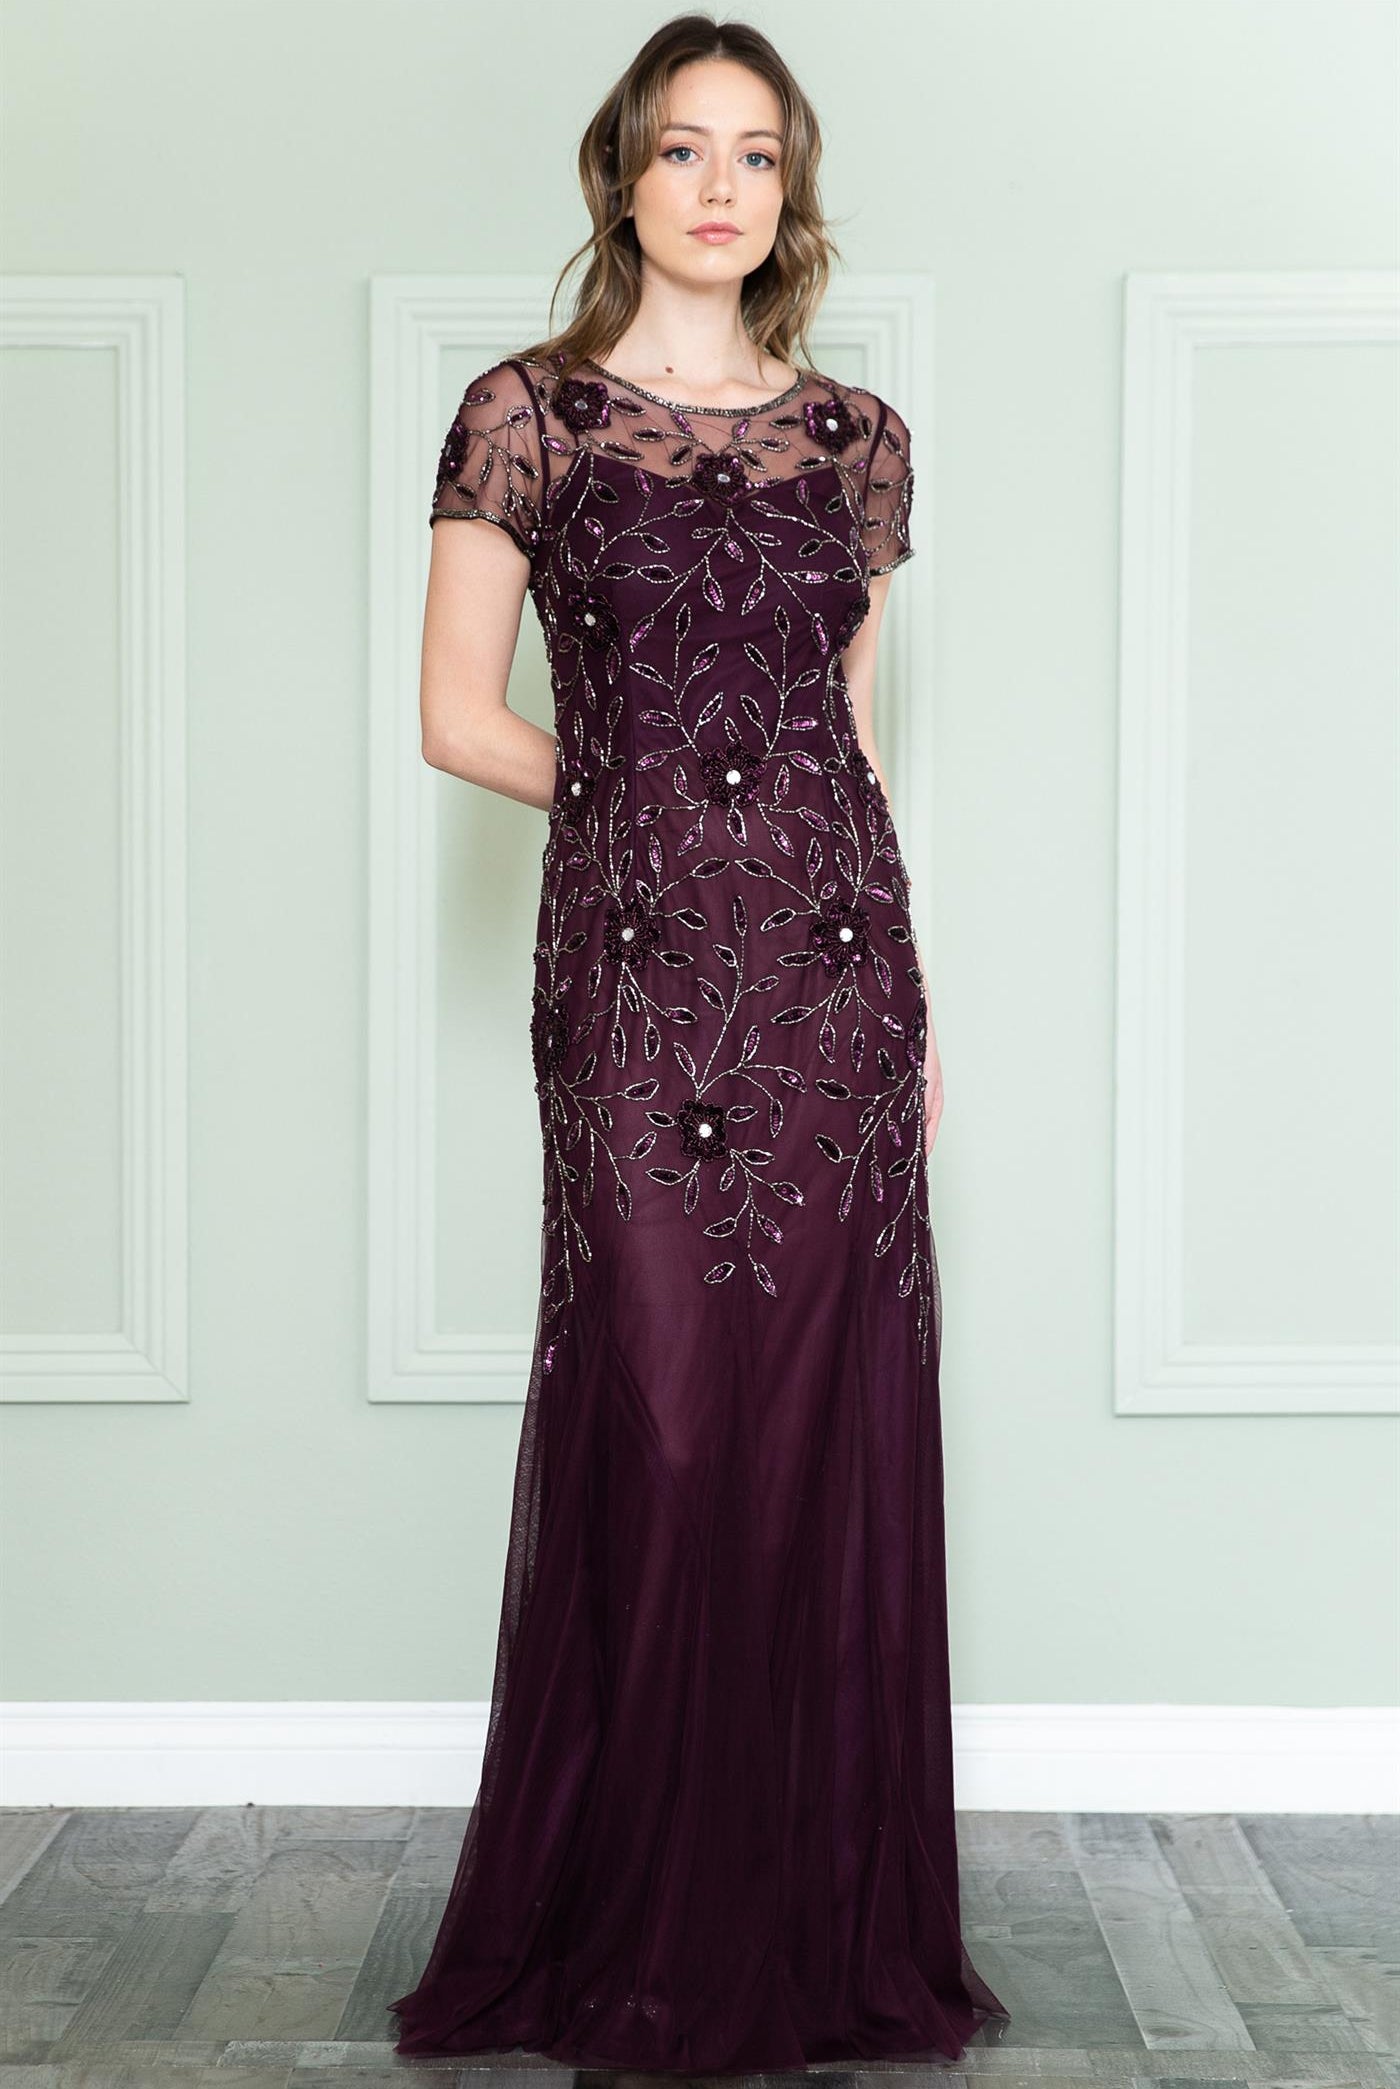 Embroidered Bodice Illusion Short Sleeves Long Mother Of The Bride Dress ACIN002-Mother of the Bride Dress-smcfashion.com